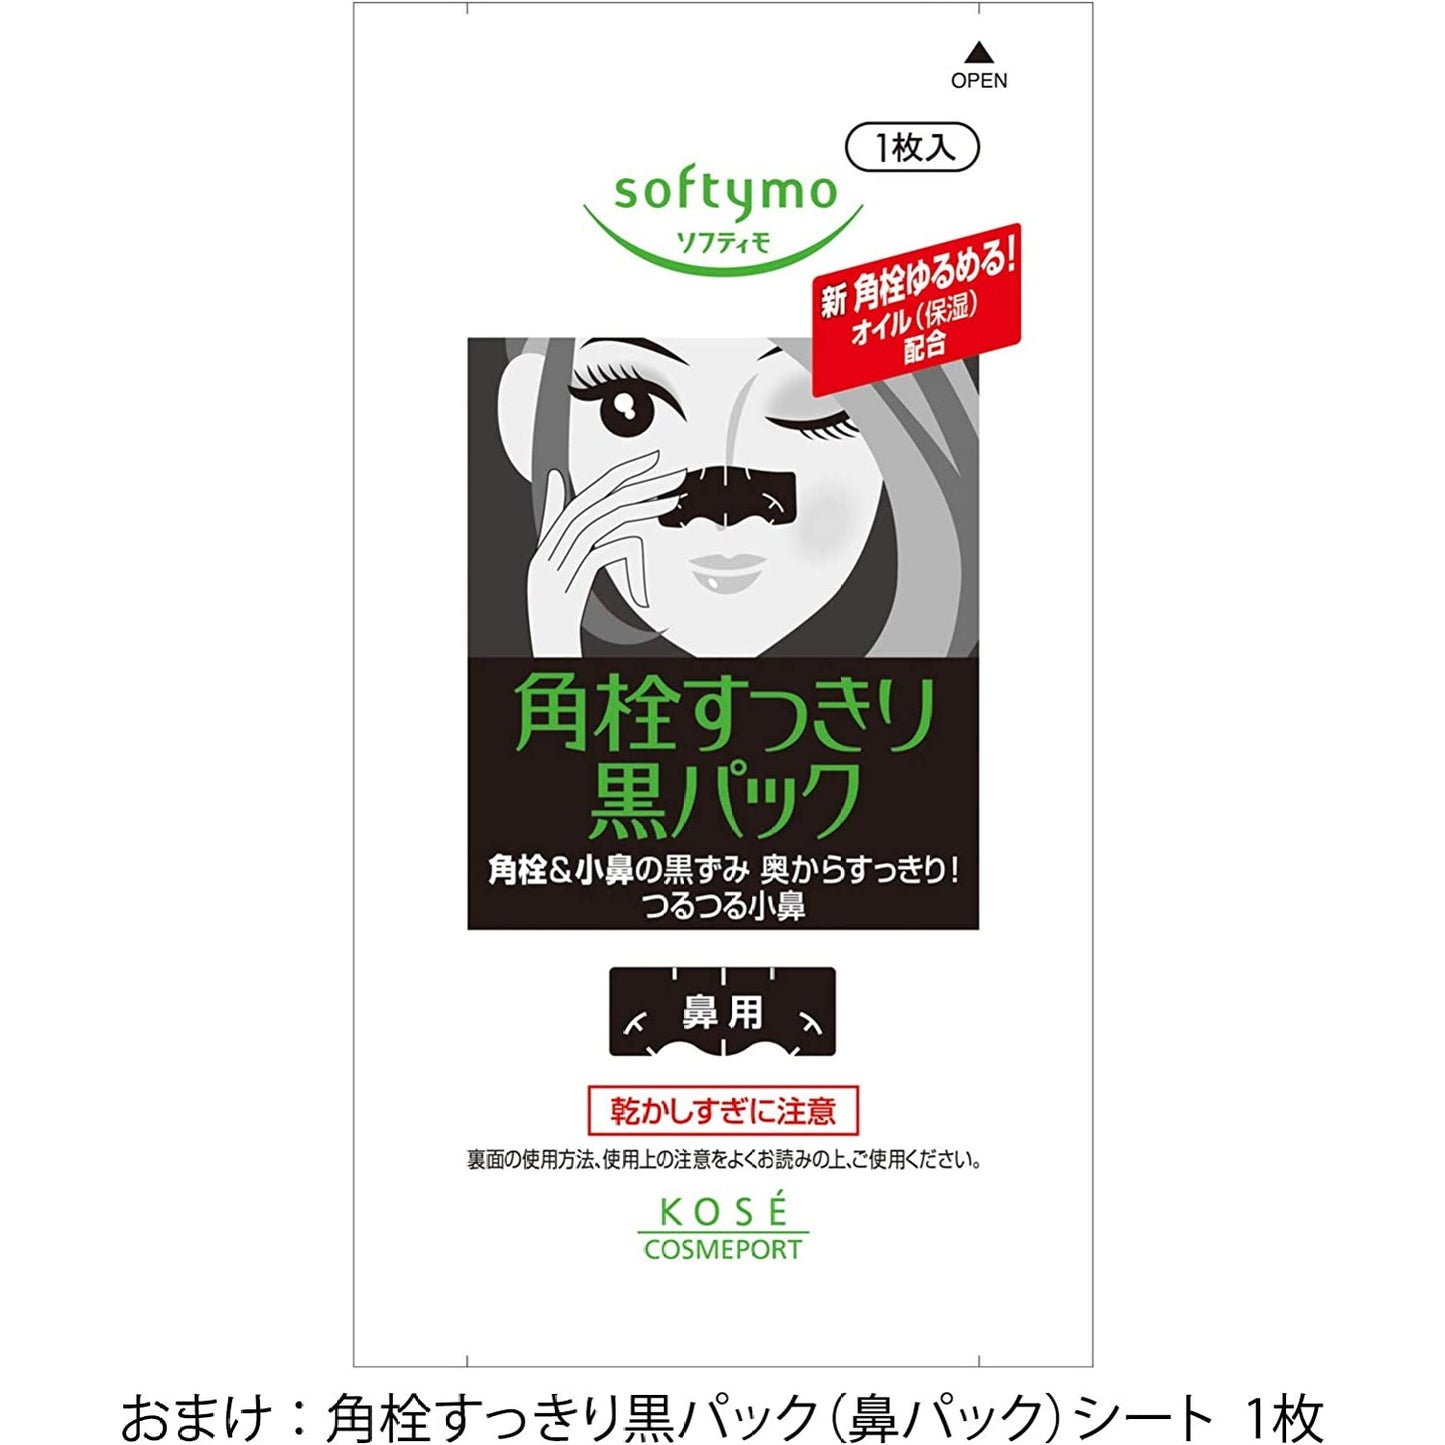 Kose - Softymo Black Pack For Nose 1pc (Made in Japan)